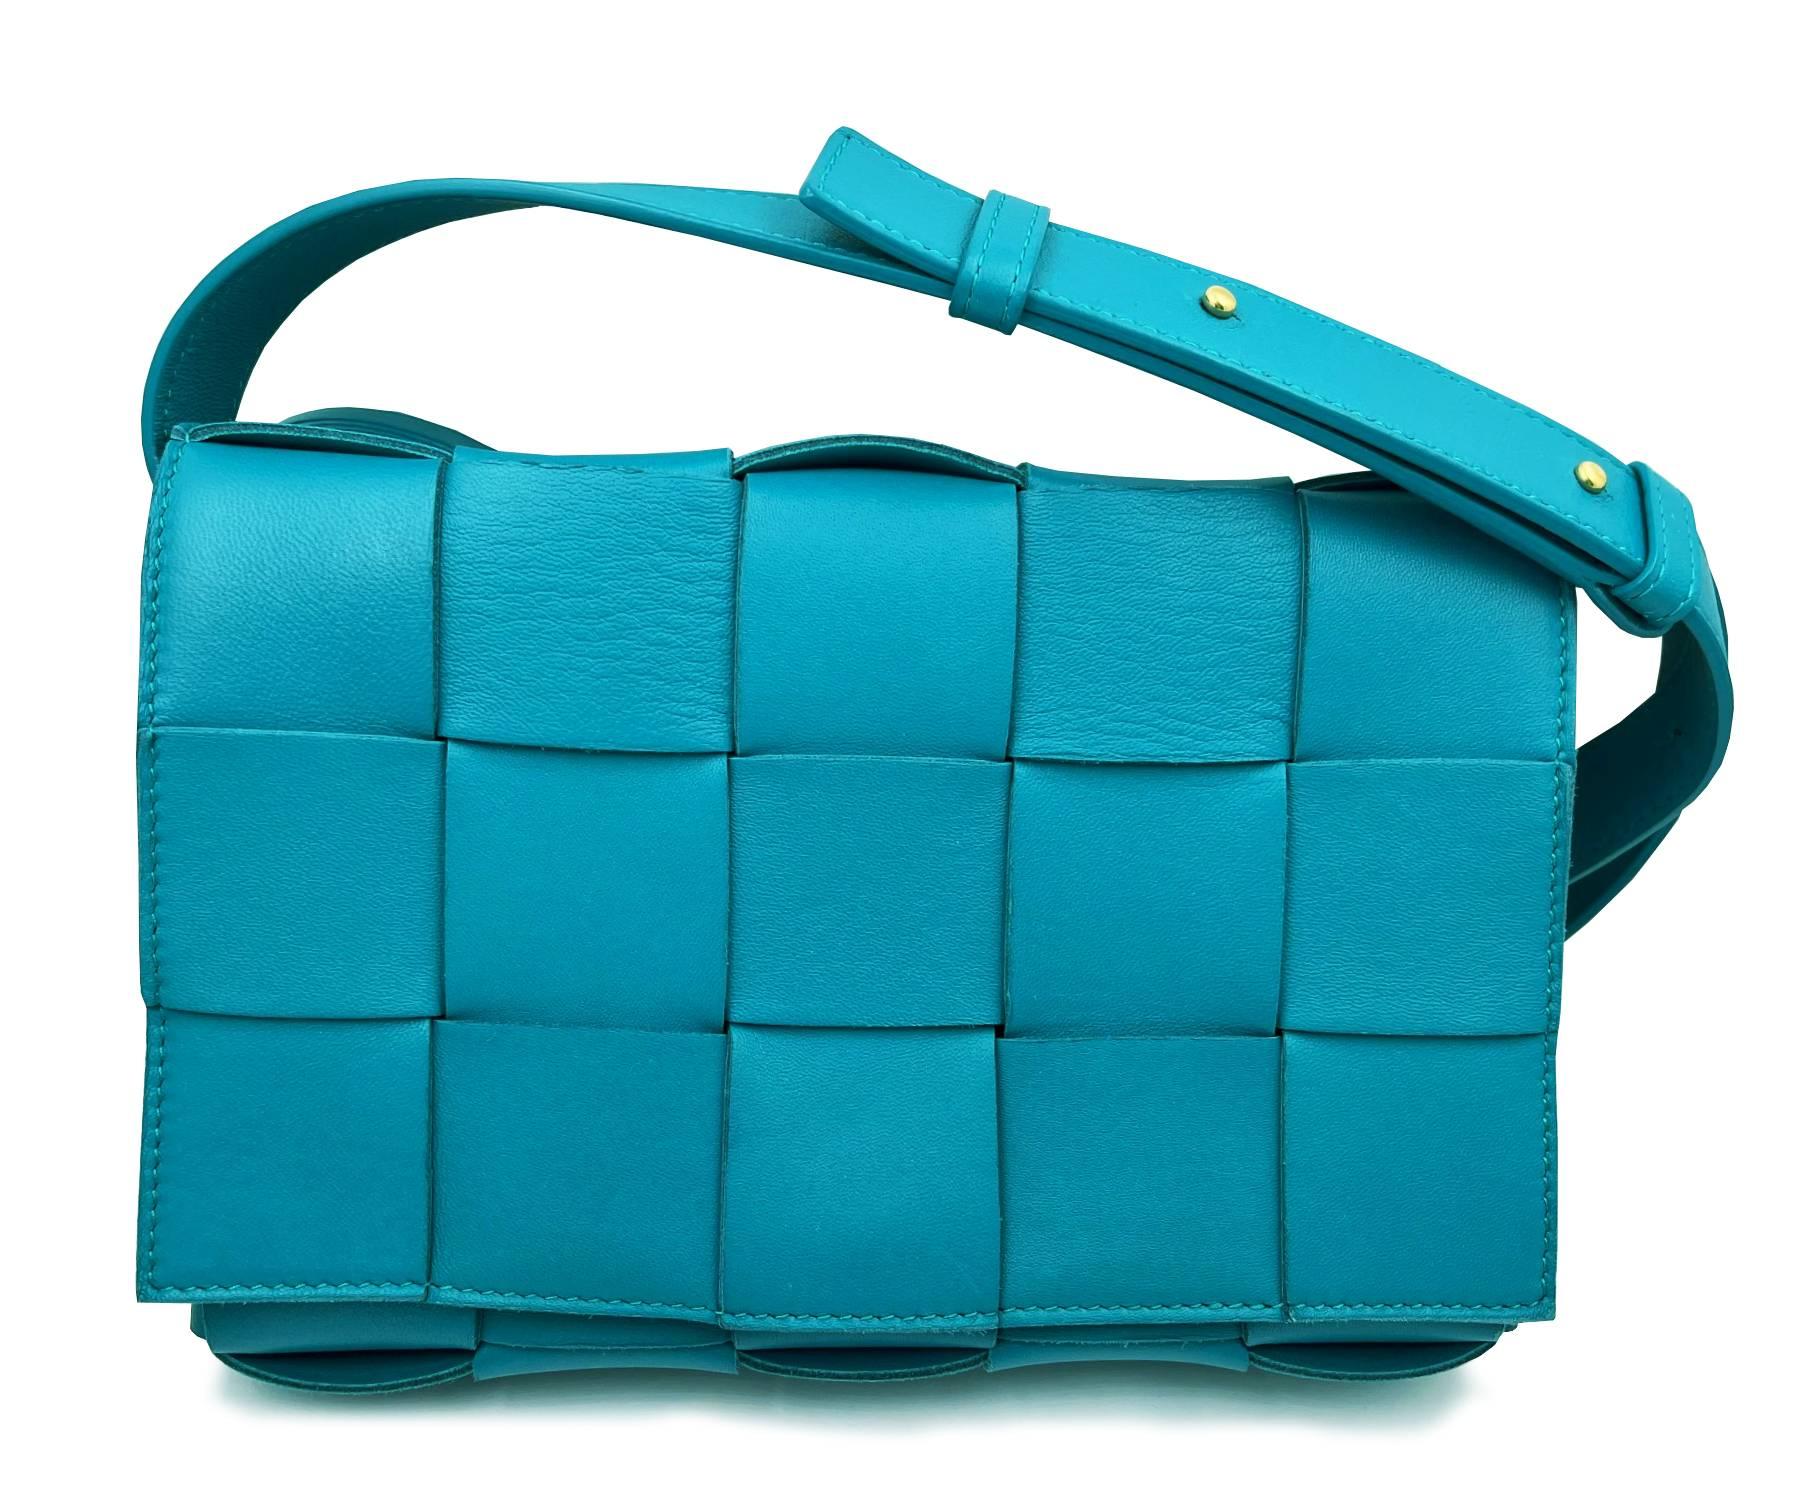 Bottega Veneta Turquoise Cassette Leather Crossbody Bag

* Marked Bottega Veneta
* Made in Italy
* Comes with the dustbag

-Approximately 2″ x 9″ x 5.5″.
-In a pristine condition
-Inside and outside are both very clean.

1000-45319